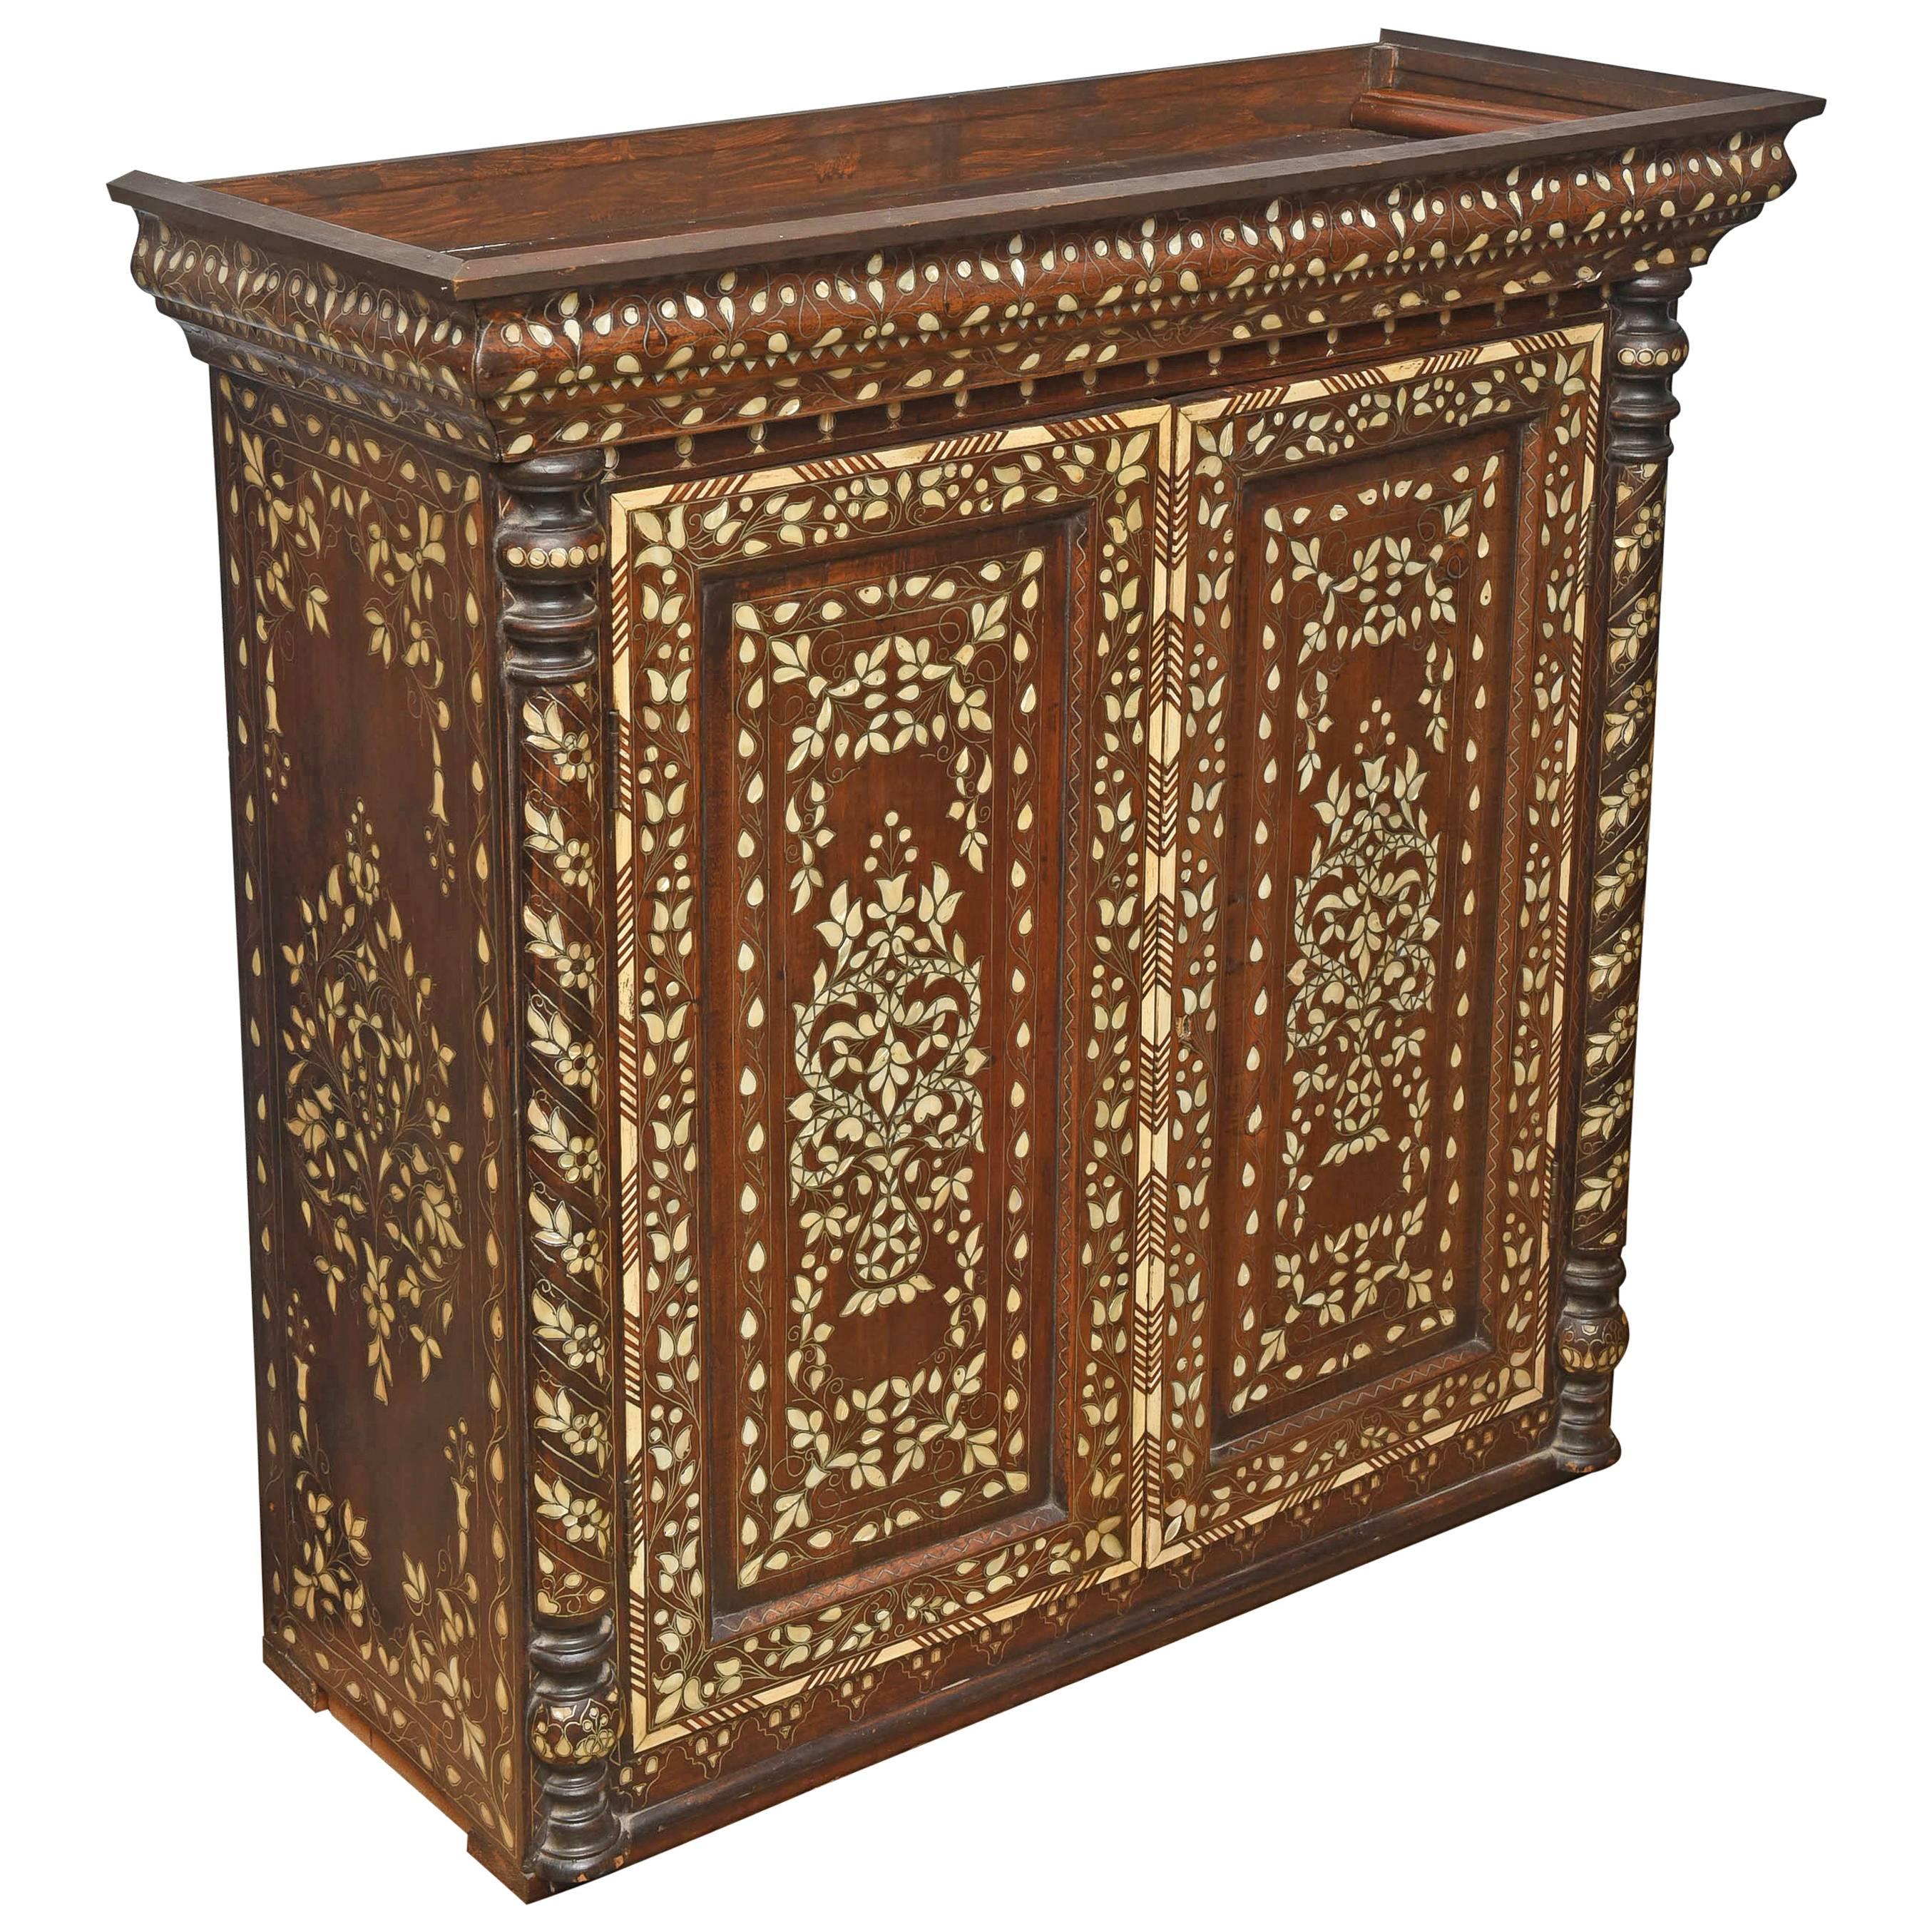 Syrian Mother-of-Pearl Cabinet